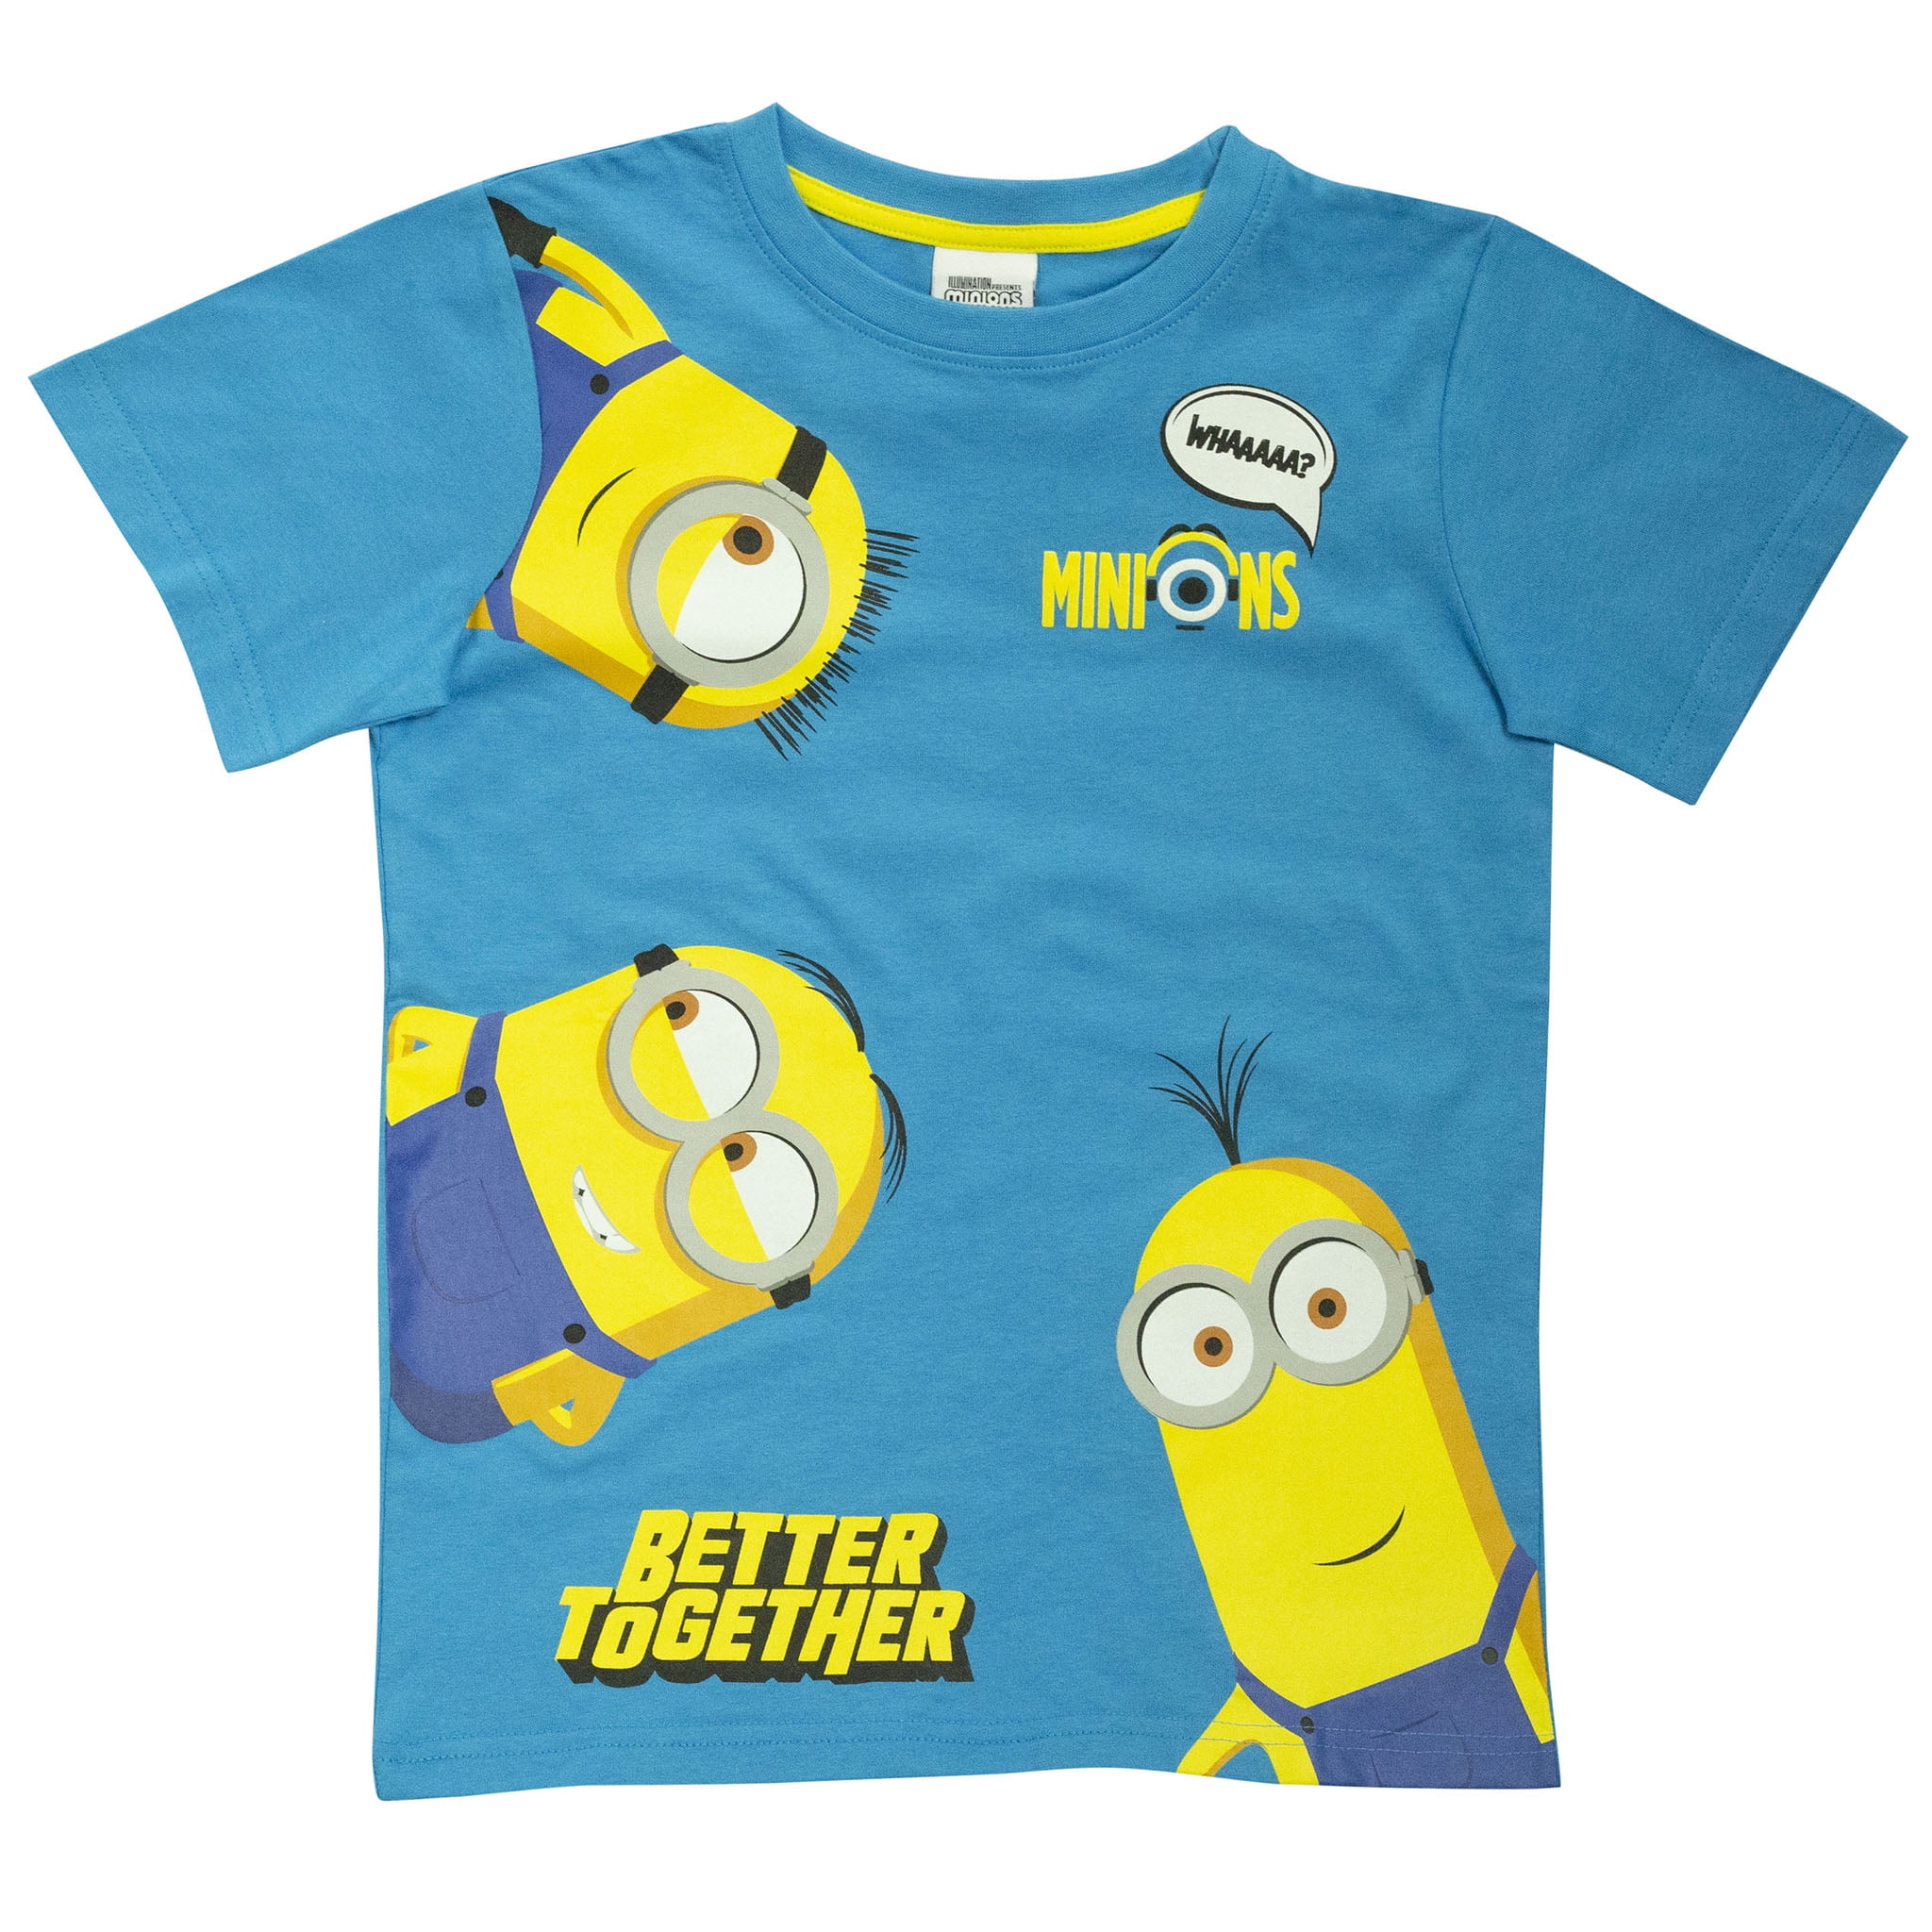 Boys Girls Official Minions Various Short Sleeve T Tee Shirt Top 3-12 Years 